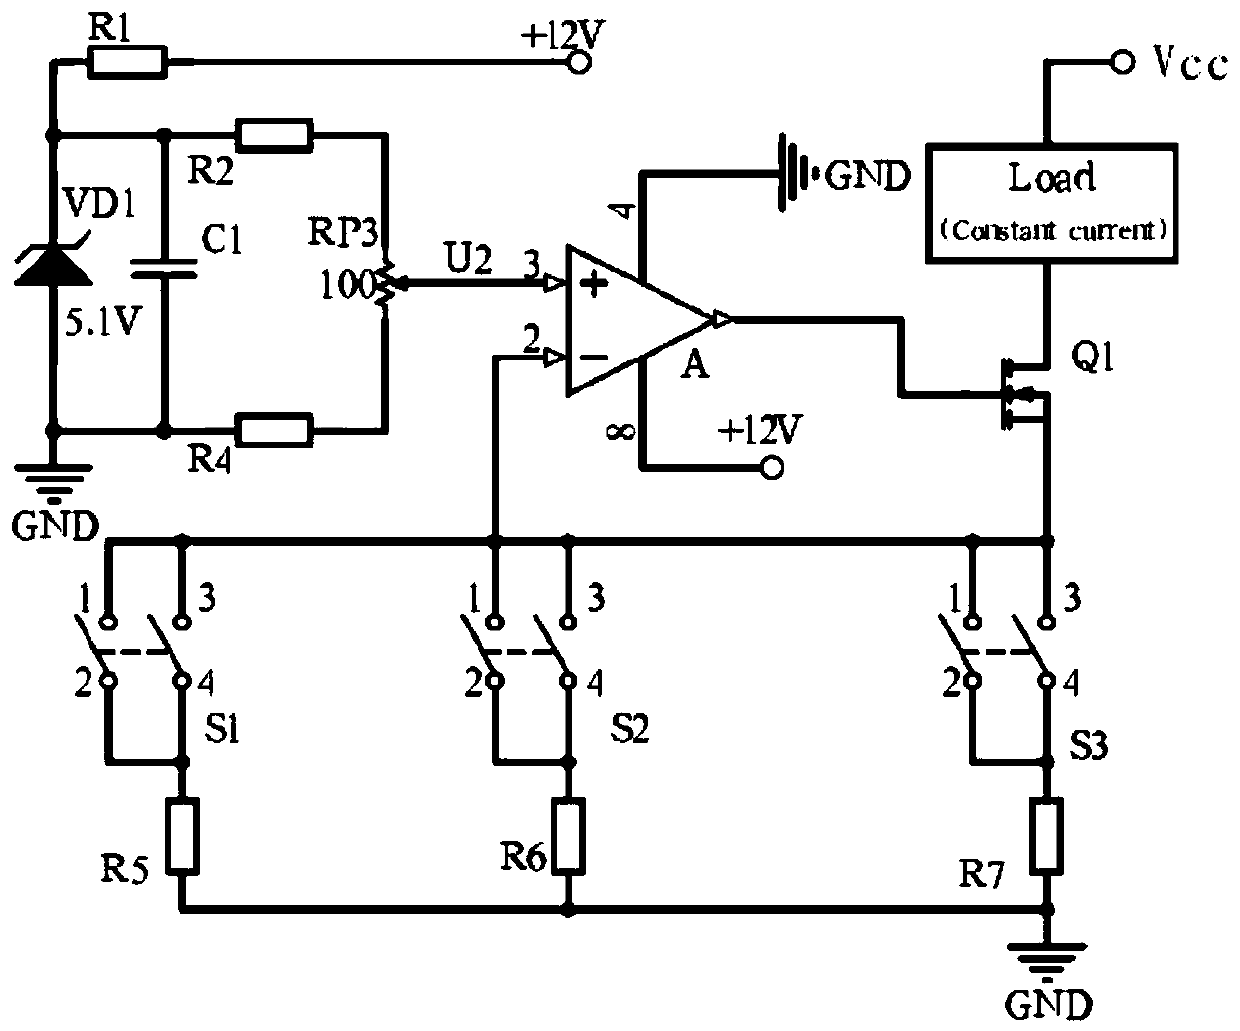 Power supply module feedback control circuit with double functions of constant current and constant voltage